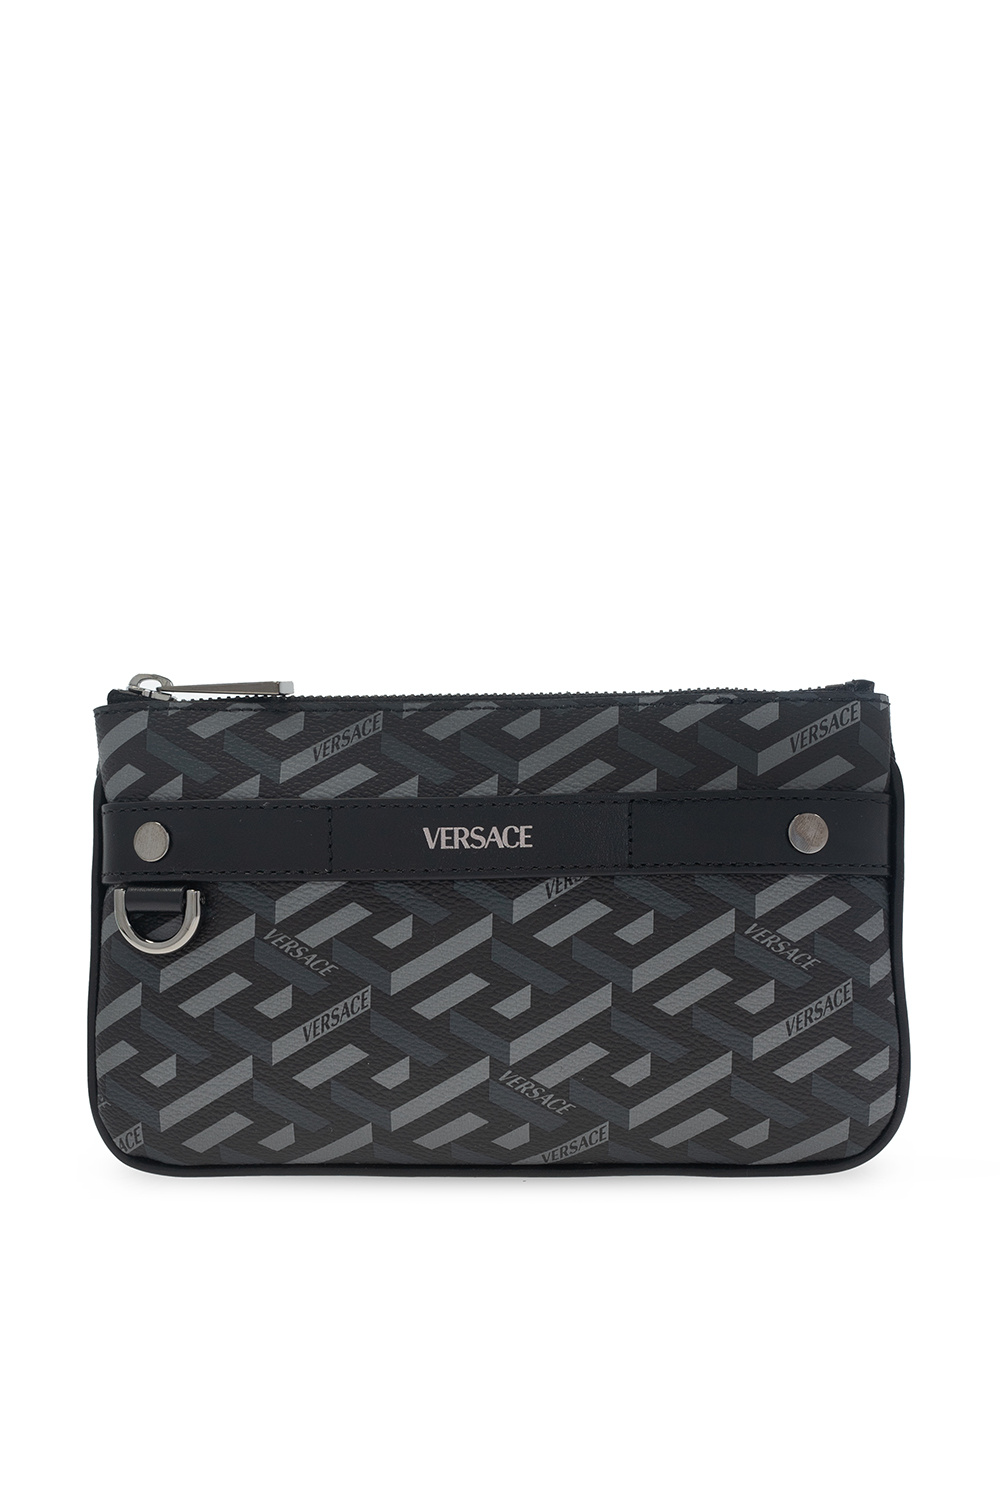 Versace Patterned pouch